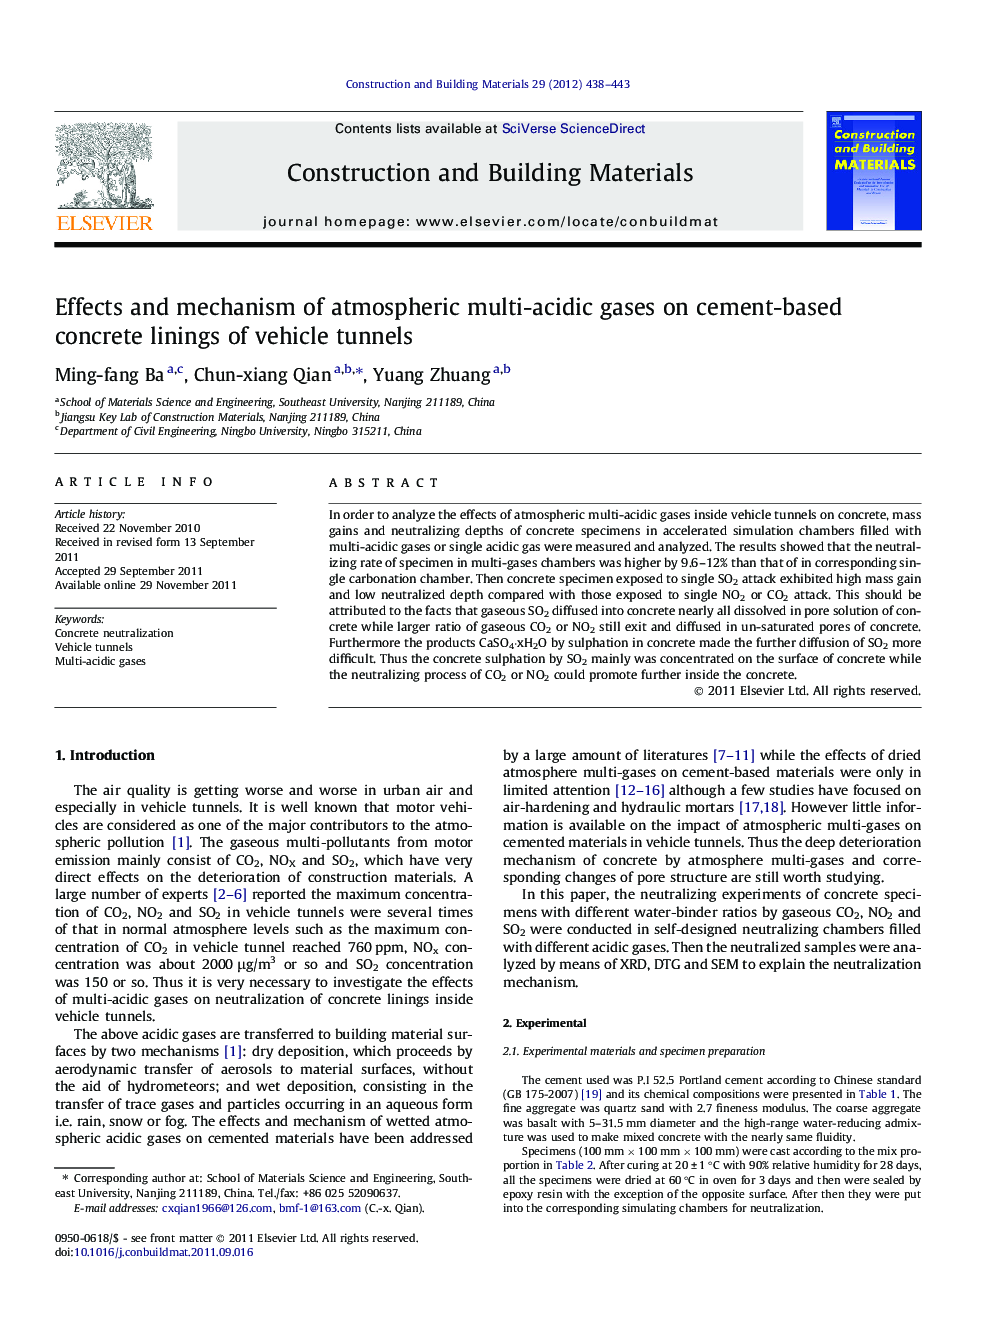 Effects and mechanism of atmospheric multi-acidic gases on cement-based concrete linings of vehicle tunnels